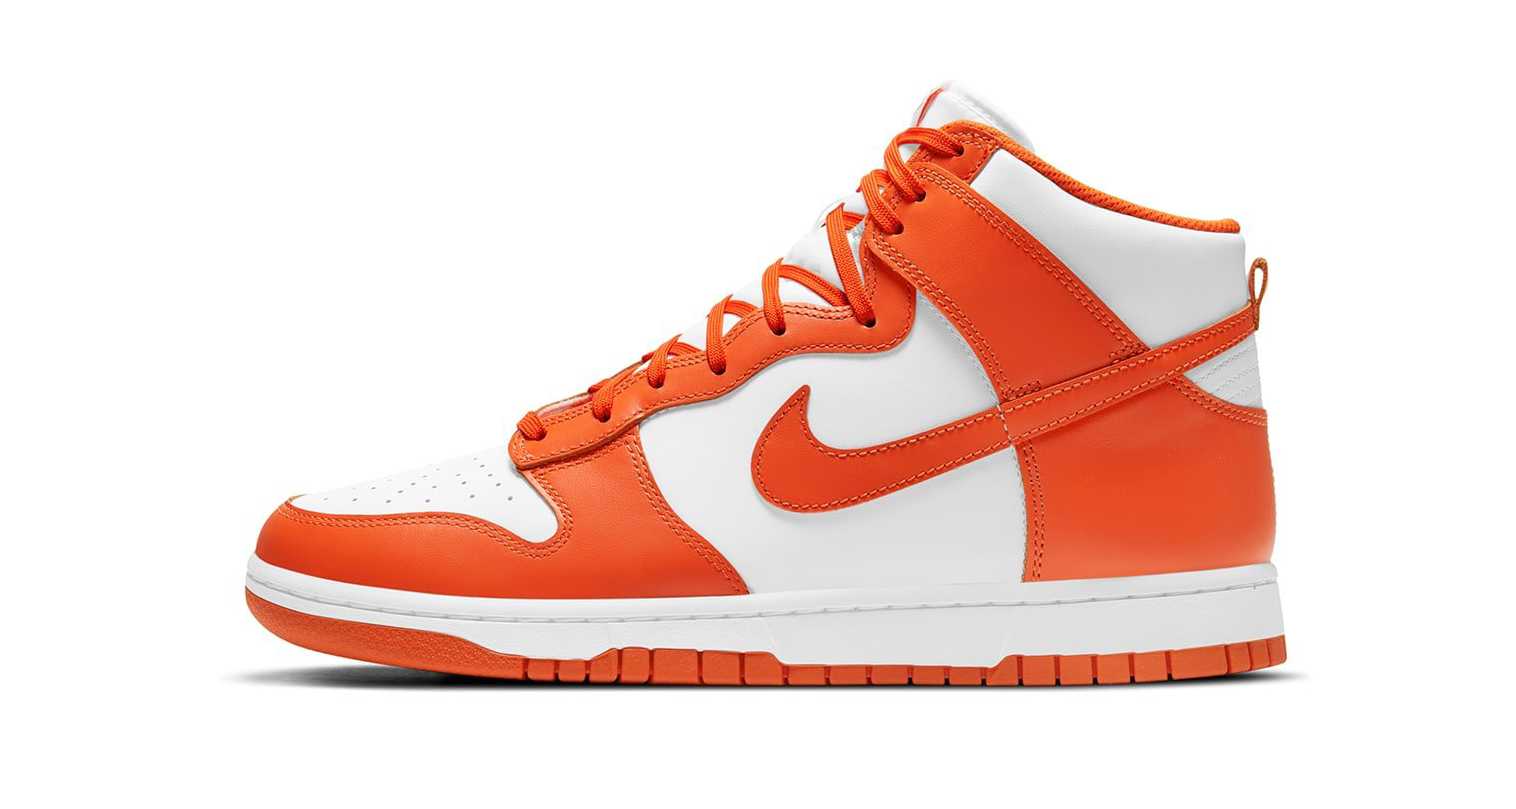 Nike Dunk High “Syracuse” Releasing This March | SoleSavy News